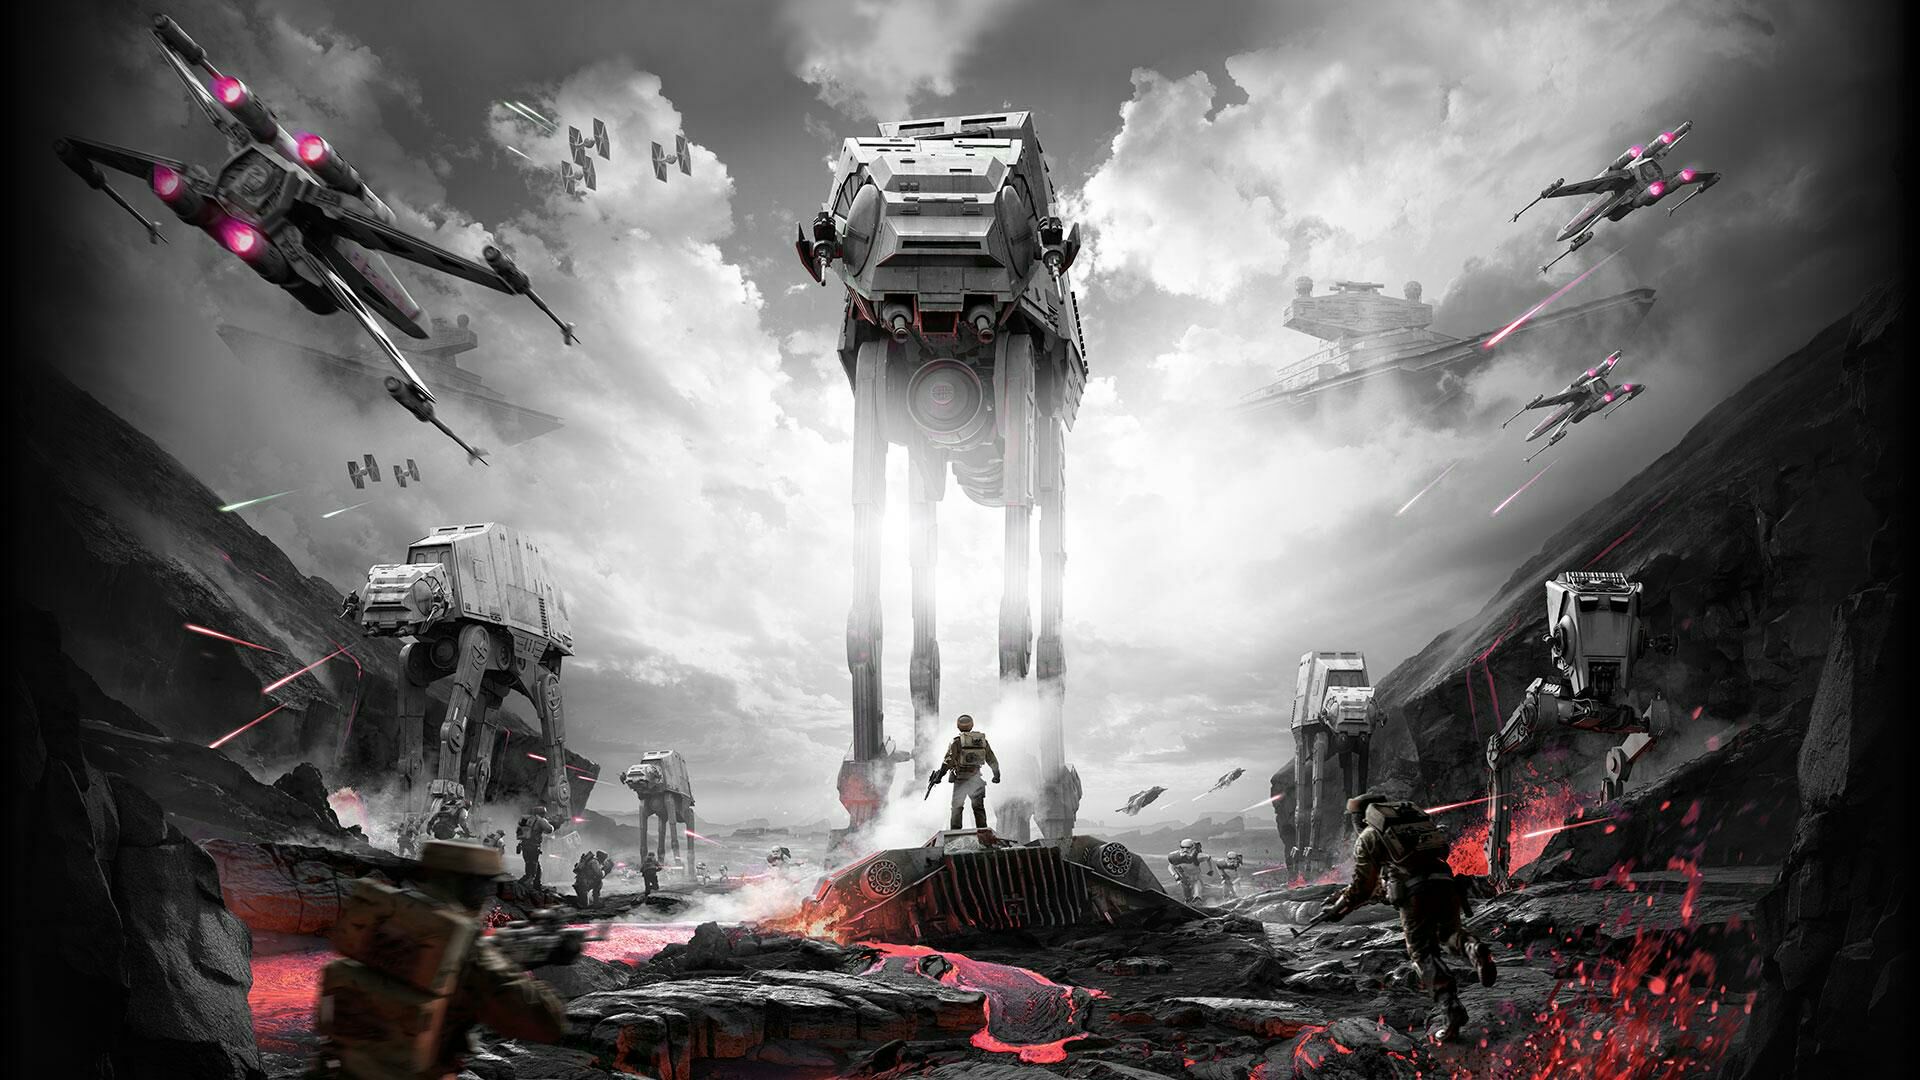 This Awesome Star Wars Battlefront Wallpaper Advice I